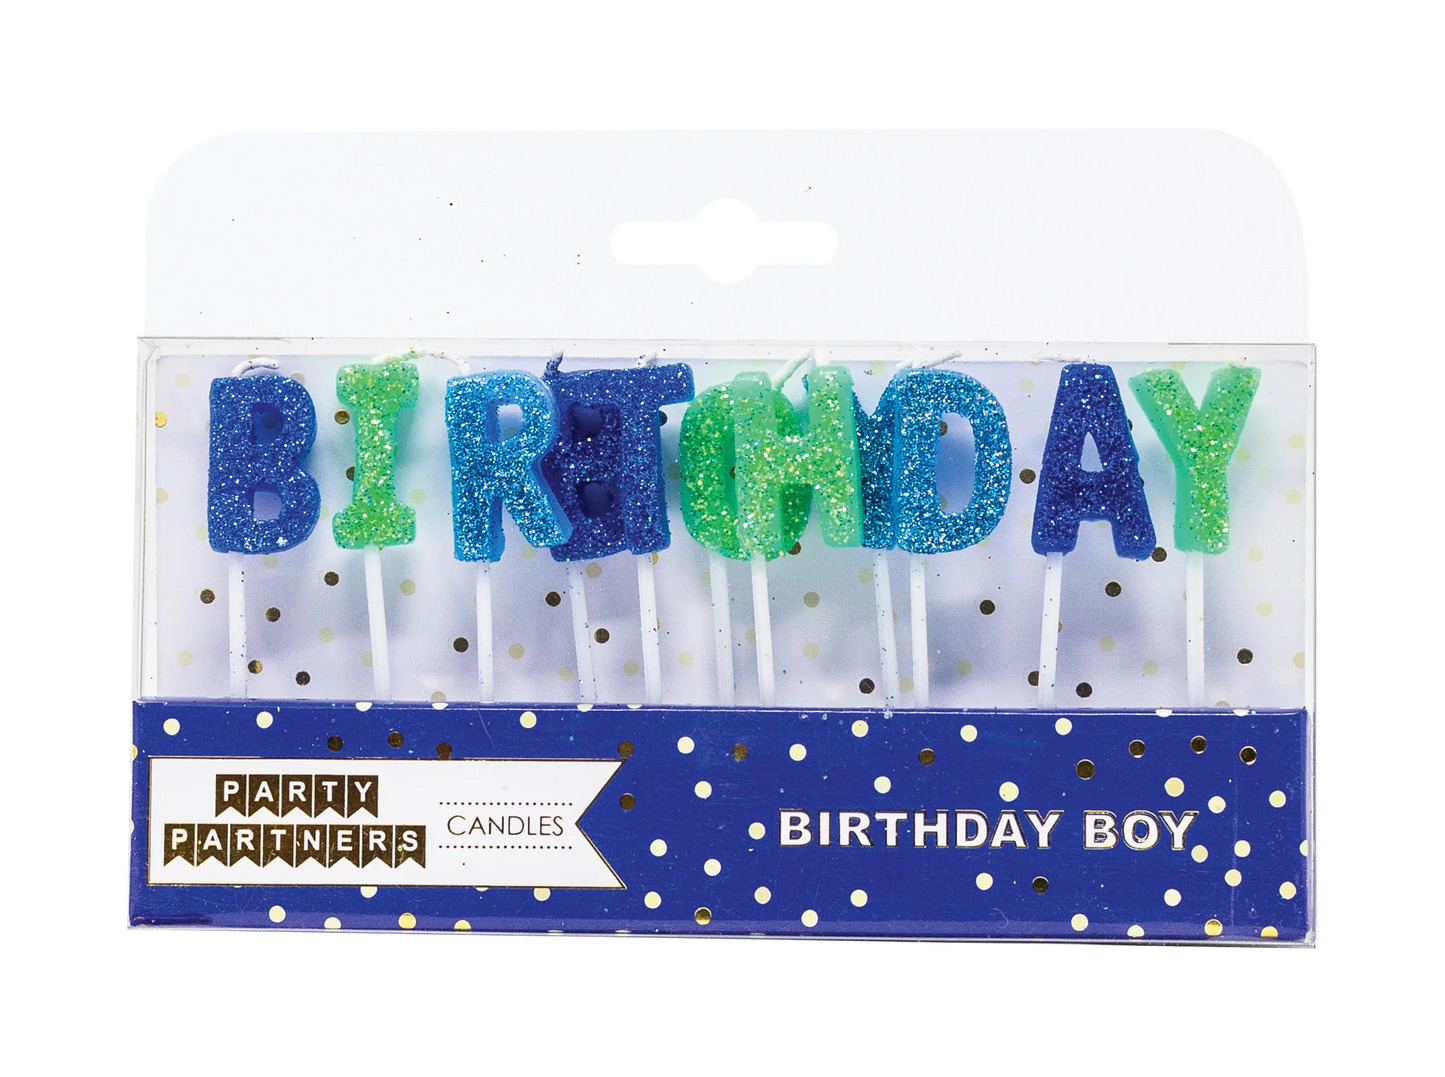 Party Partners Birthday Boy Candle Set For Pets